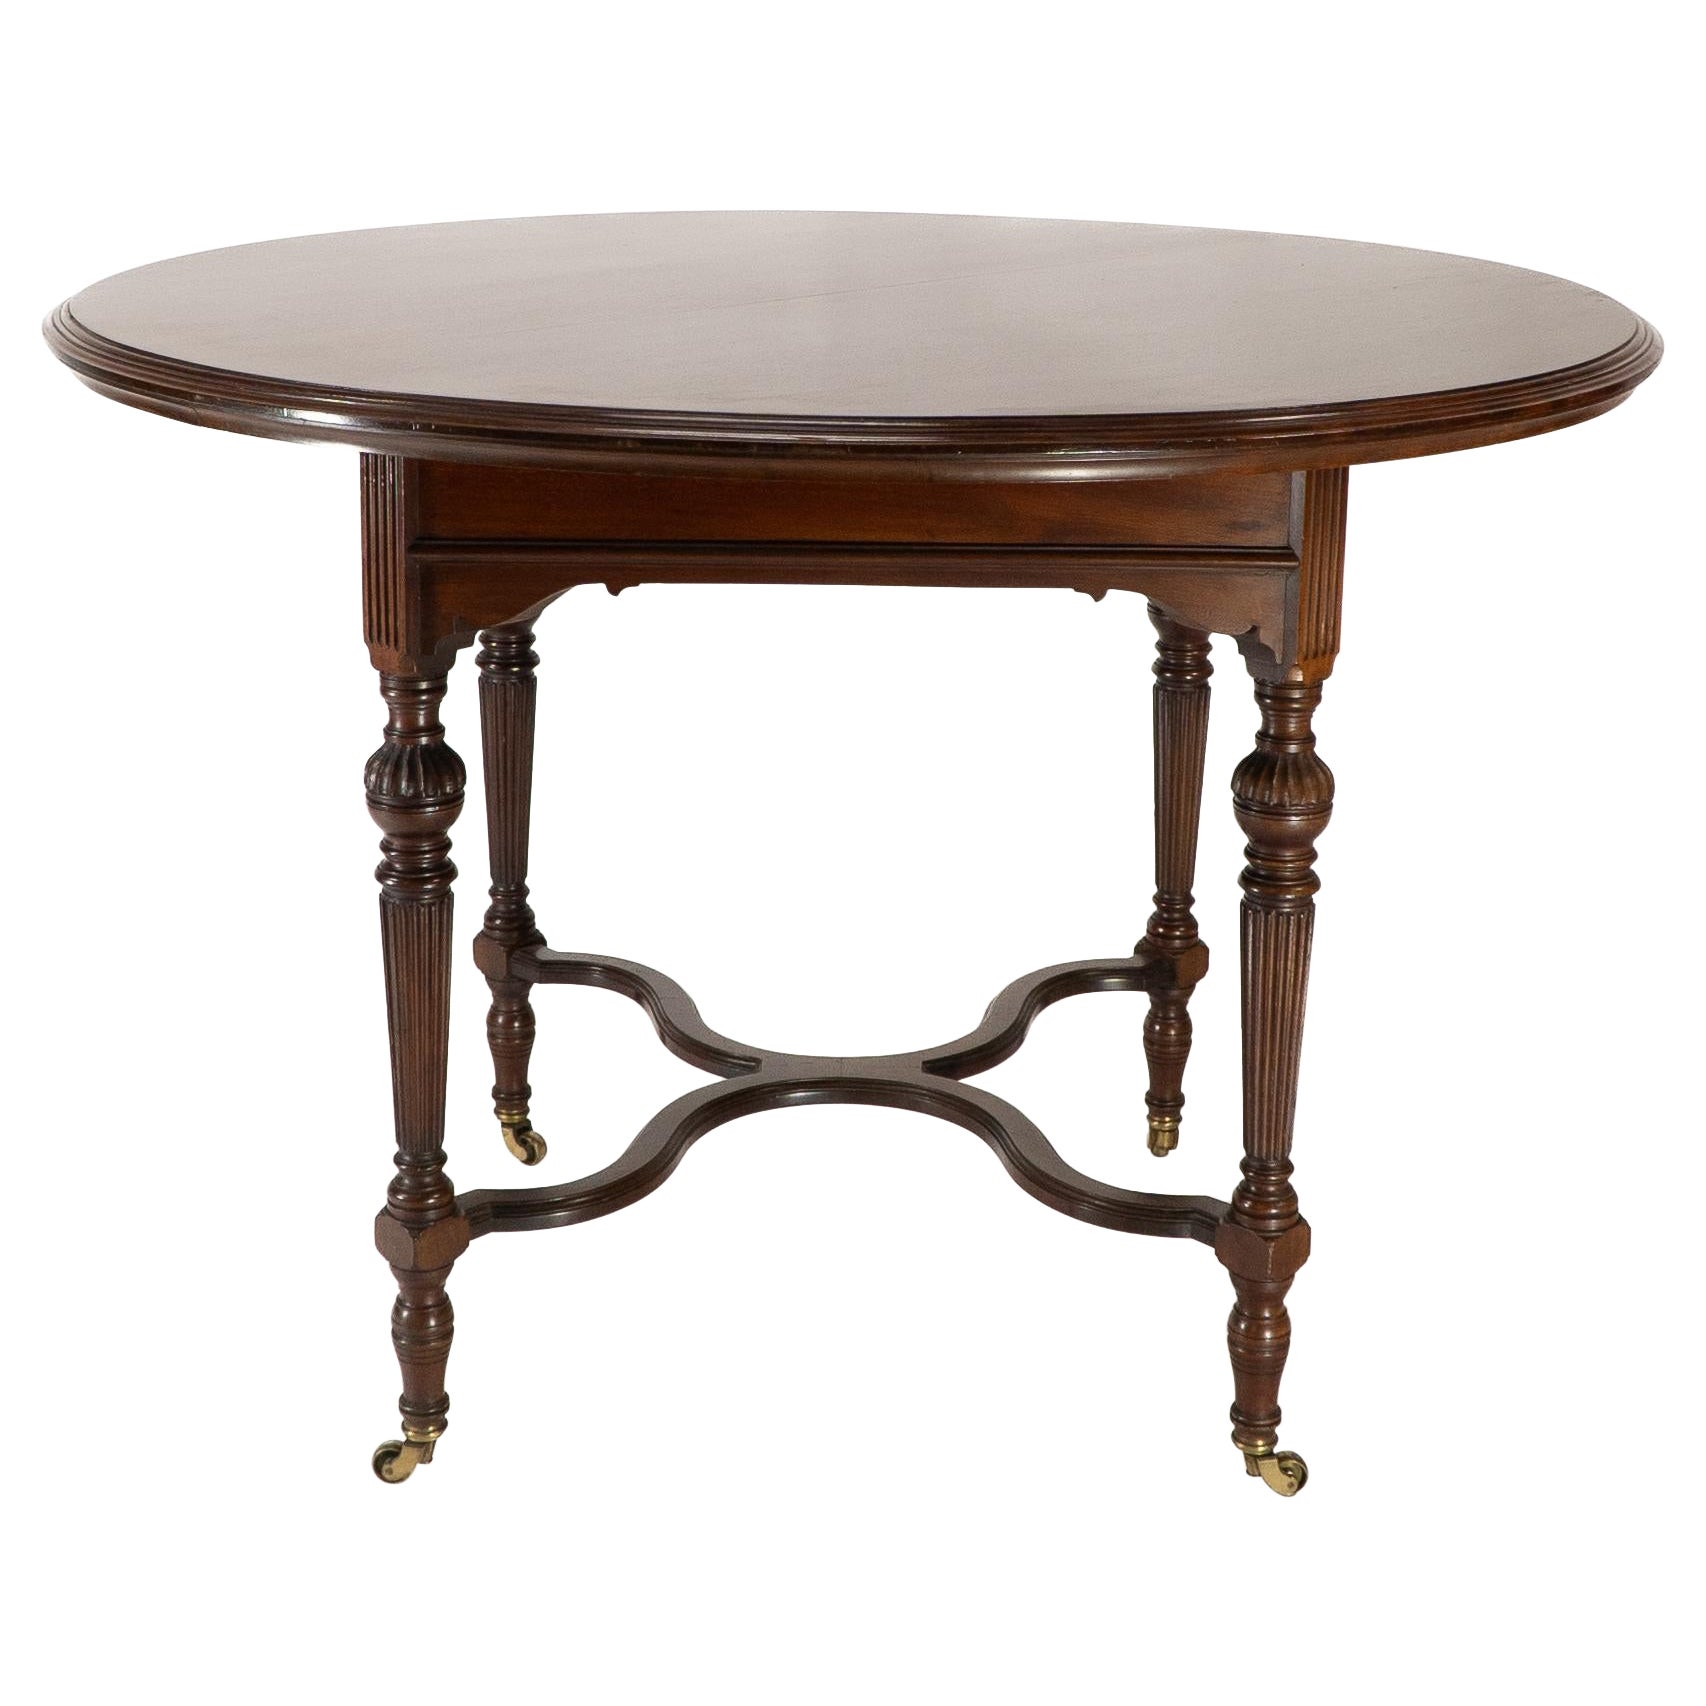 Collinson & Lock attributed. An Aesthetic Movement walnut circular center table For Sale